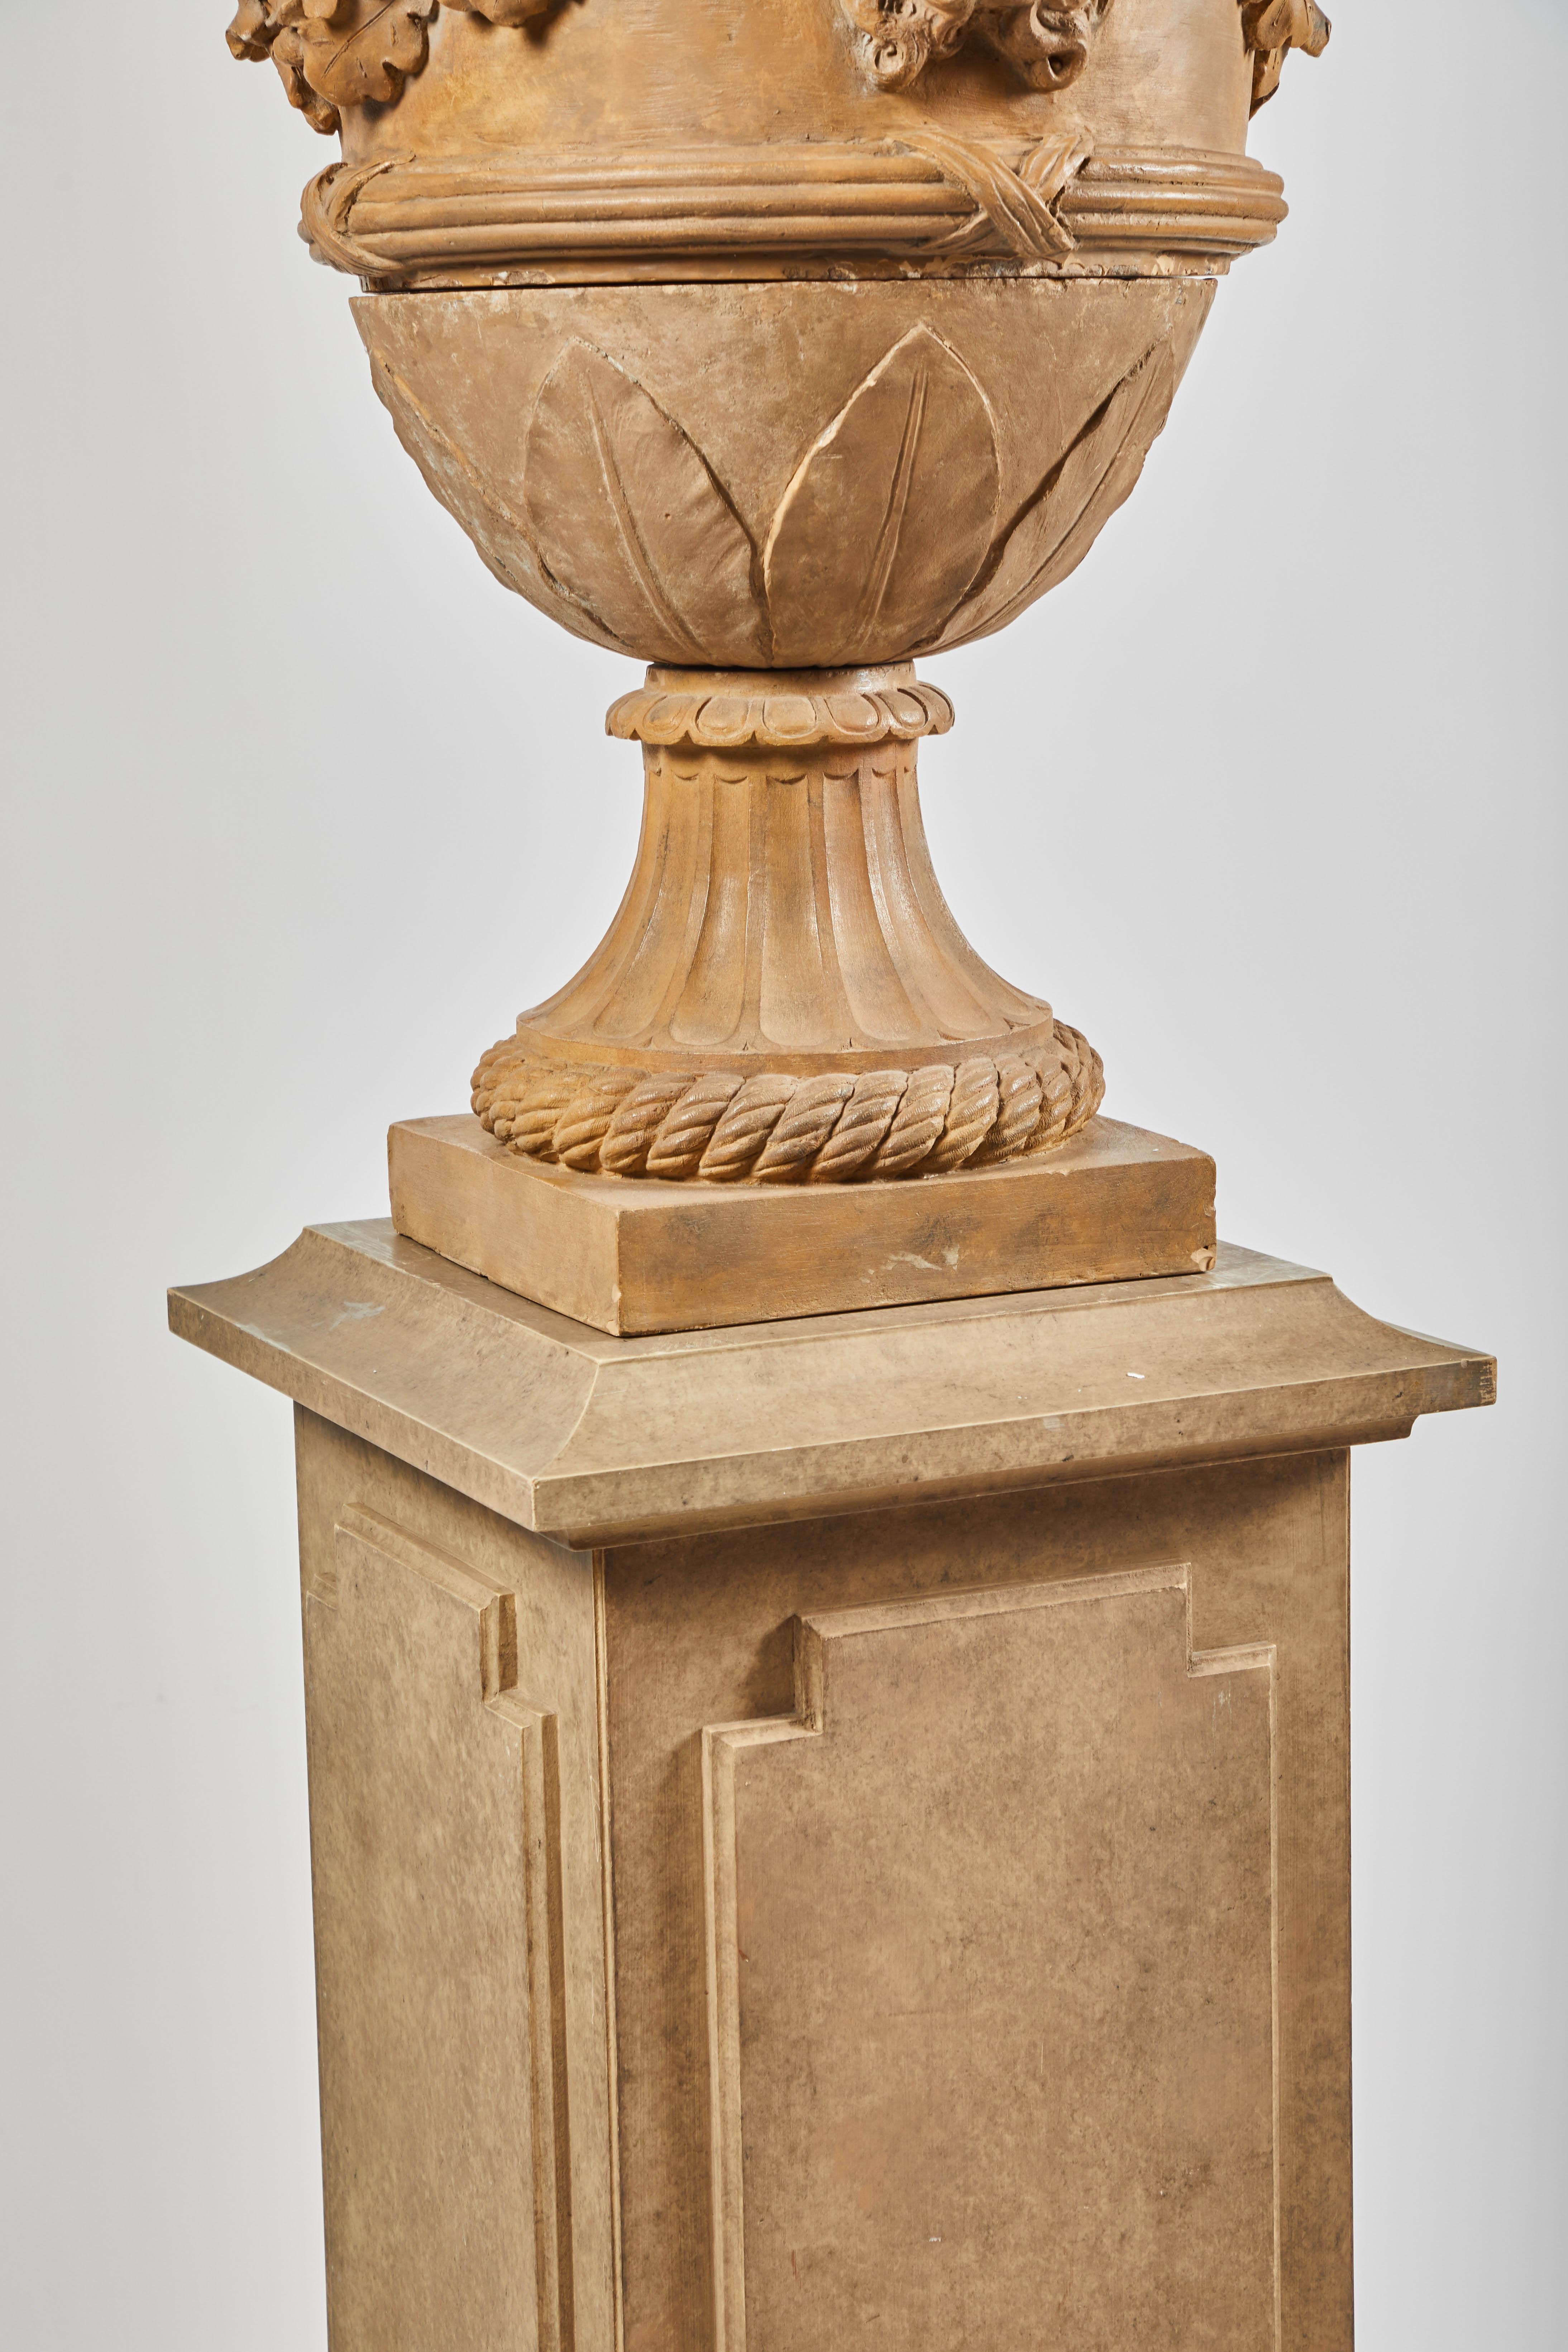 18th Century Terracotta Urns on Pedestals from the Collection of Karl Lagerfeld For Sale 7